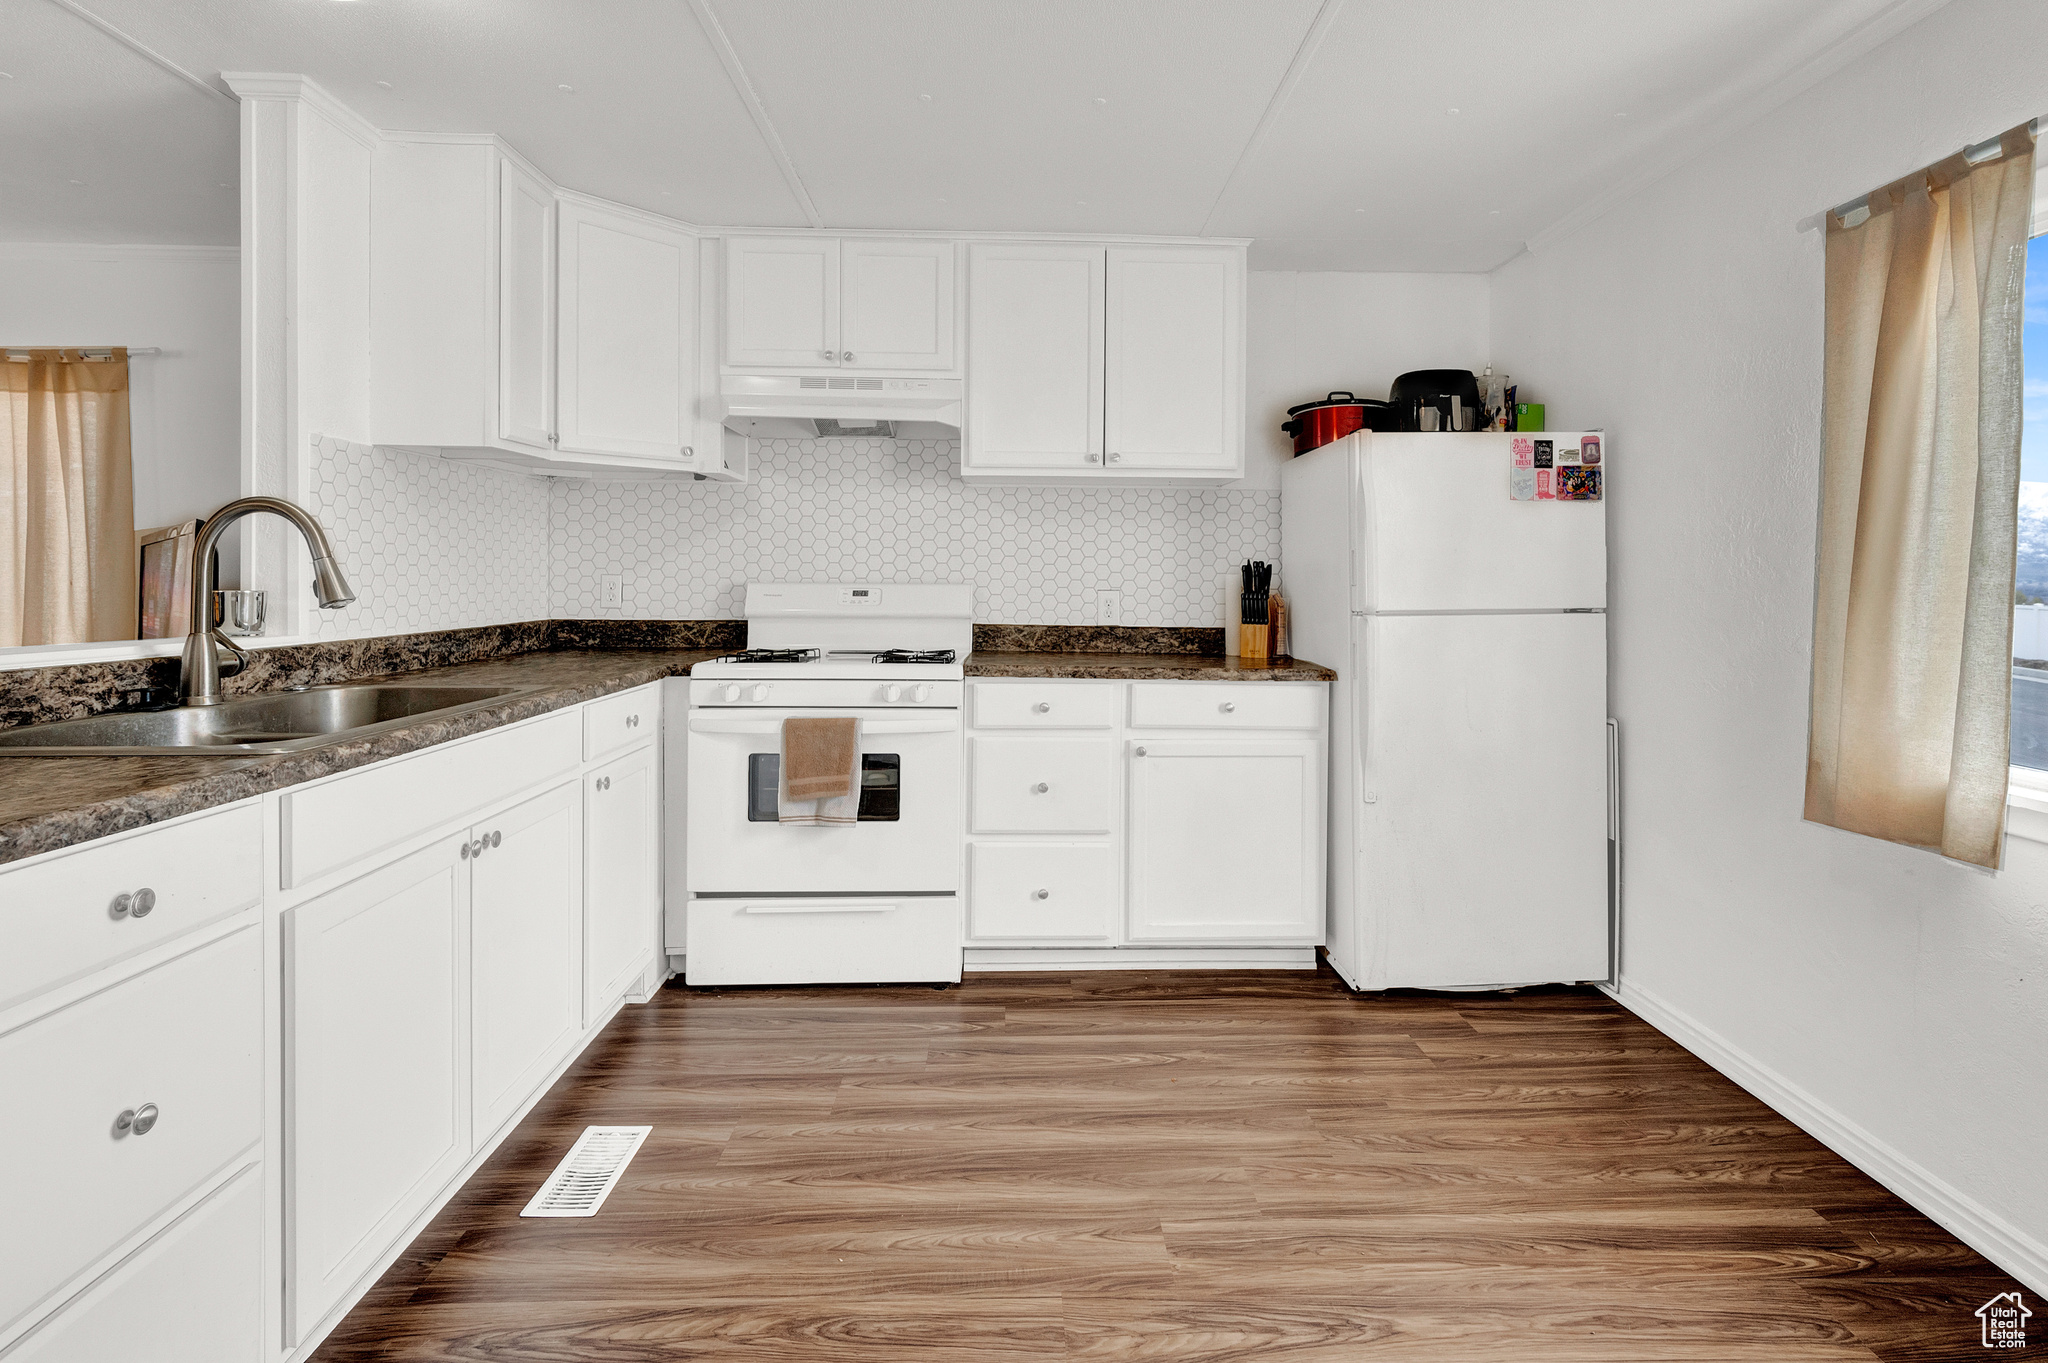 Kitchen with white cabinets, hardwood / wood-style floors, white appliances, and sink